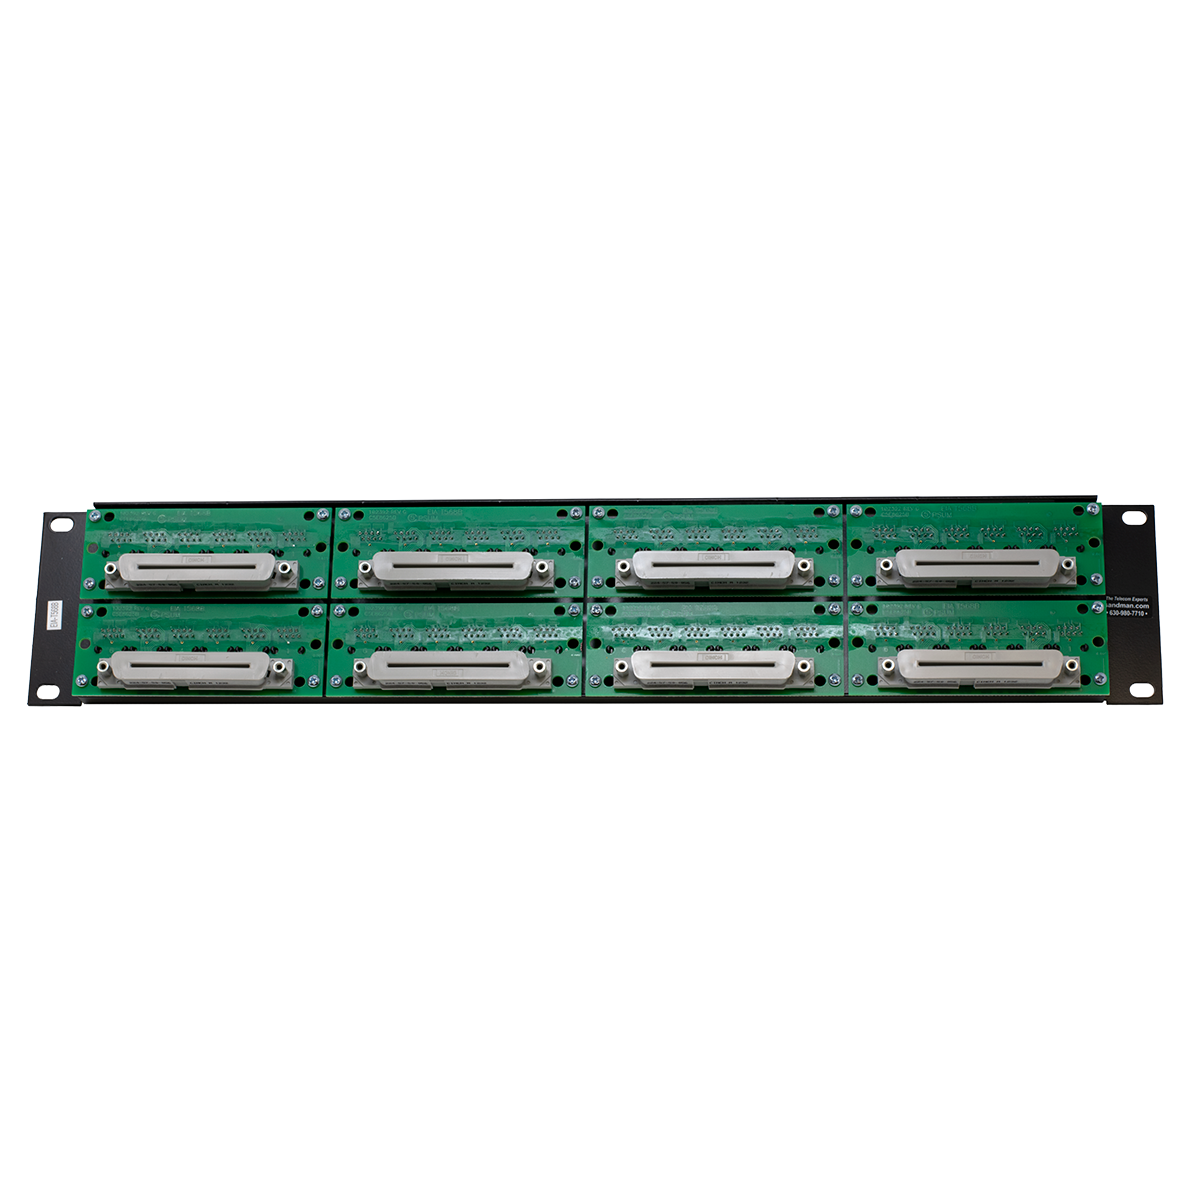 48 Port CAT5E Patch Panel with 8 Female Amp (Back View)